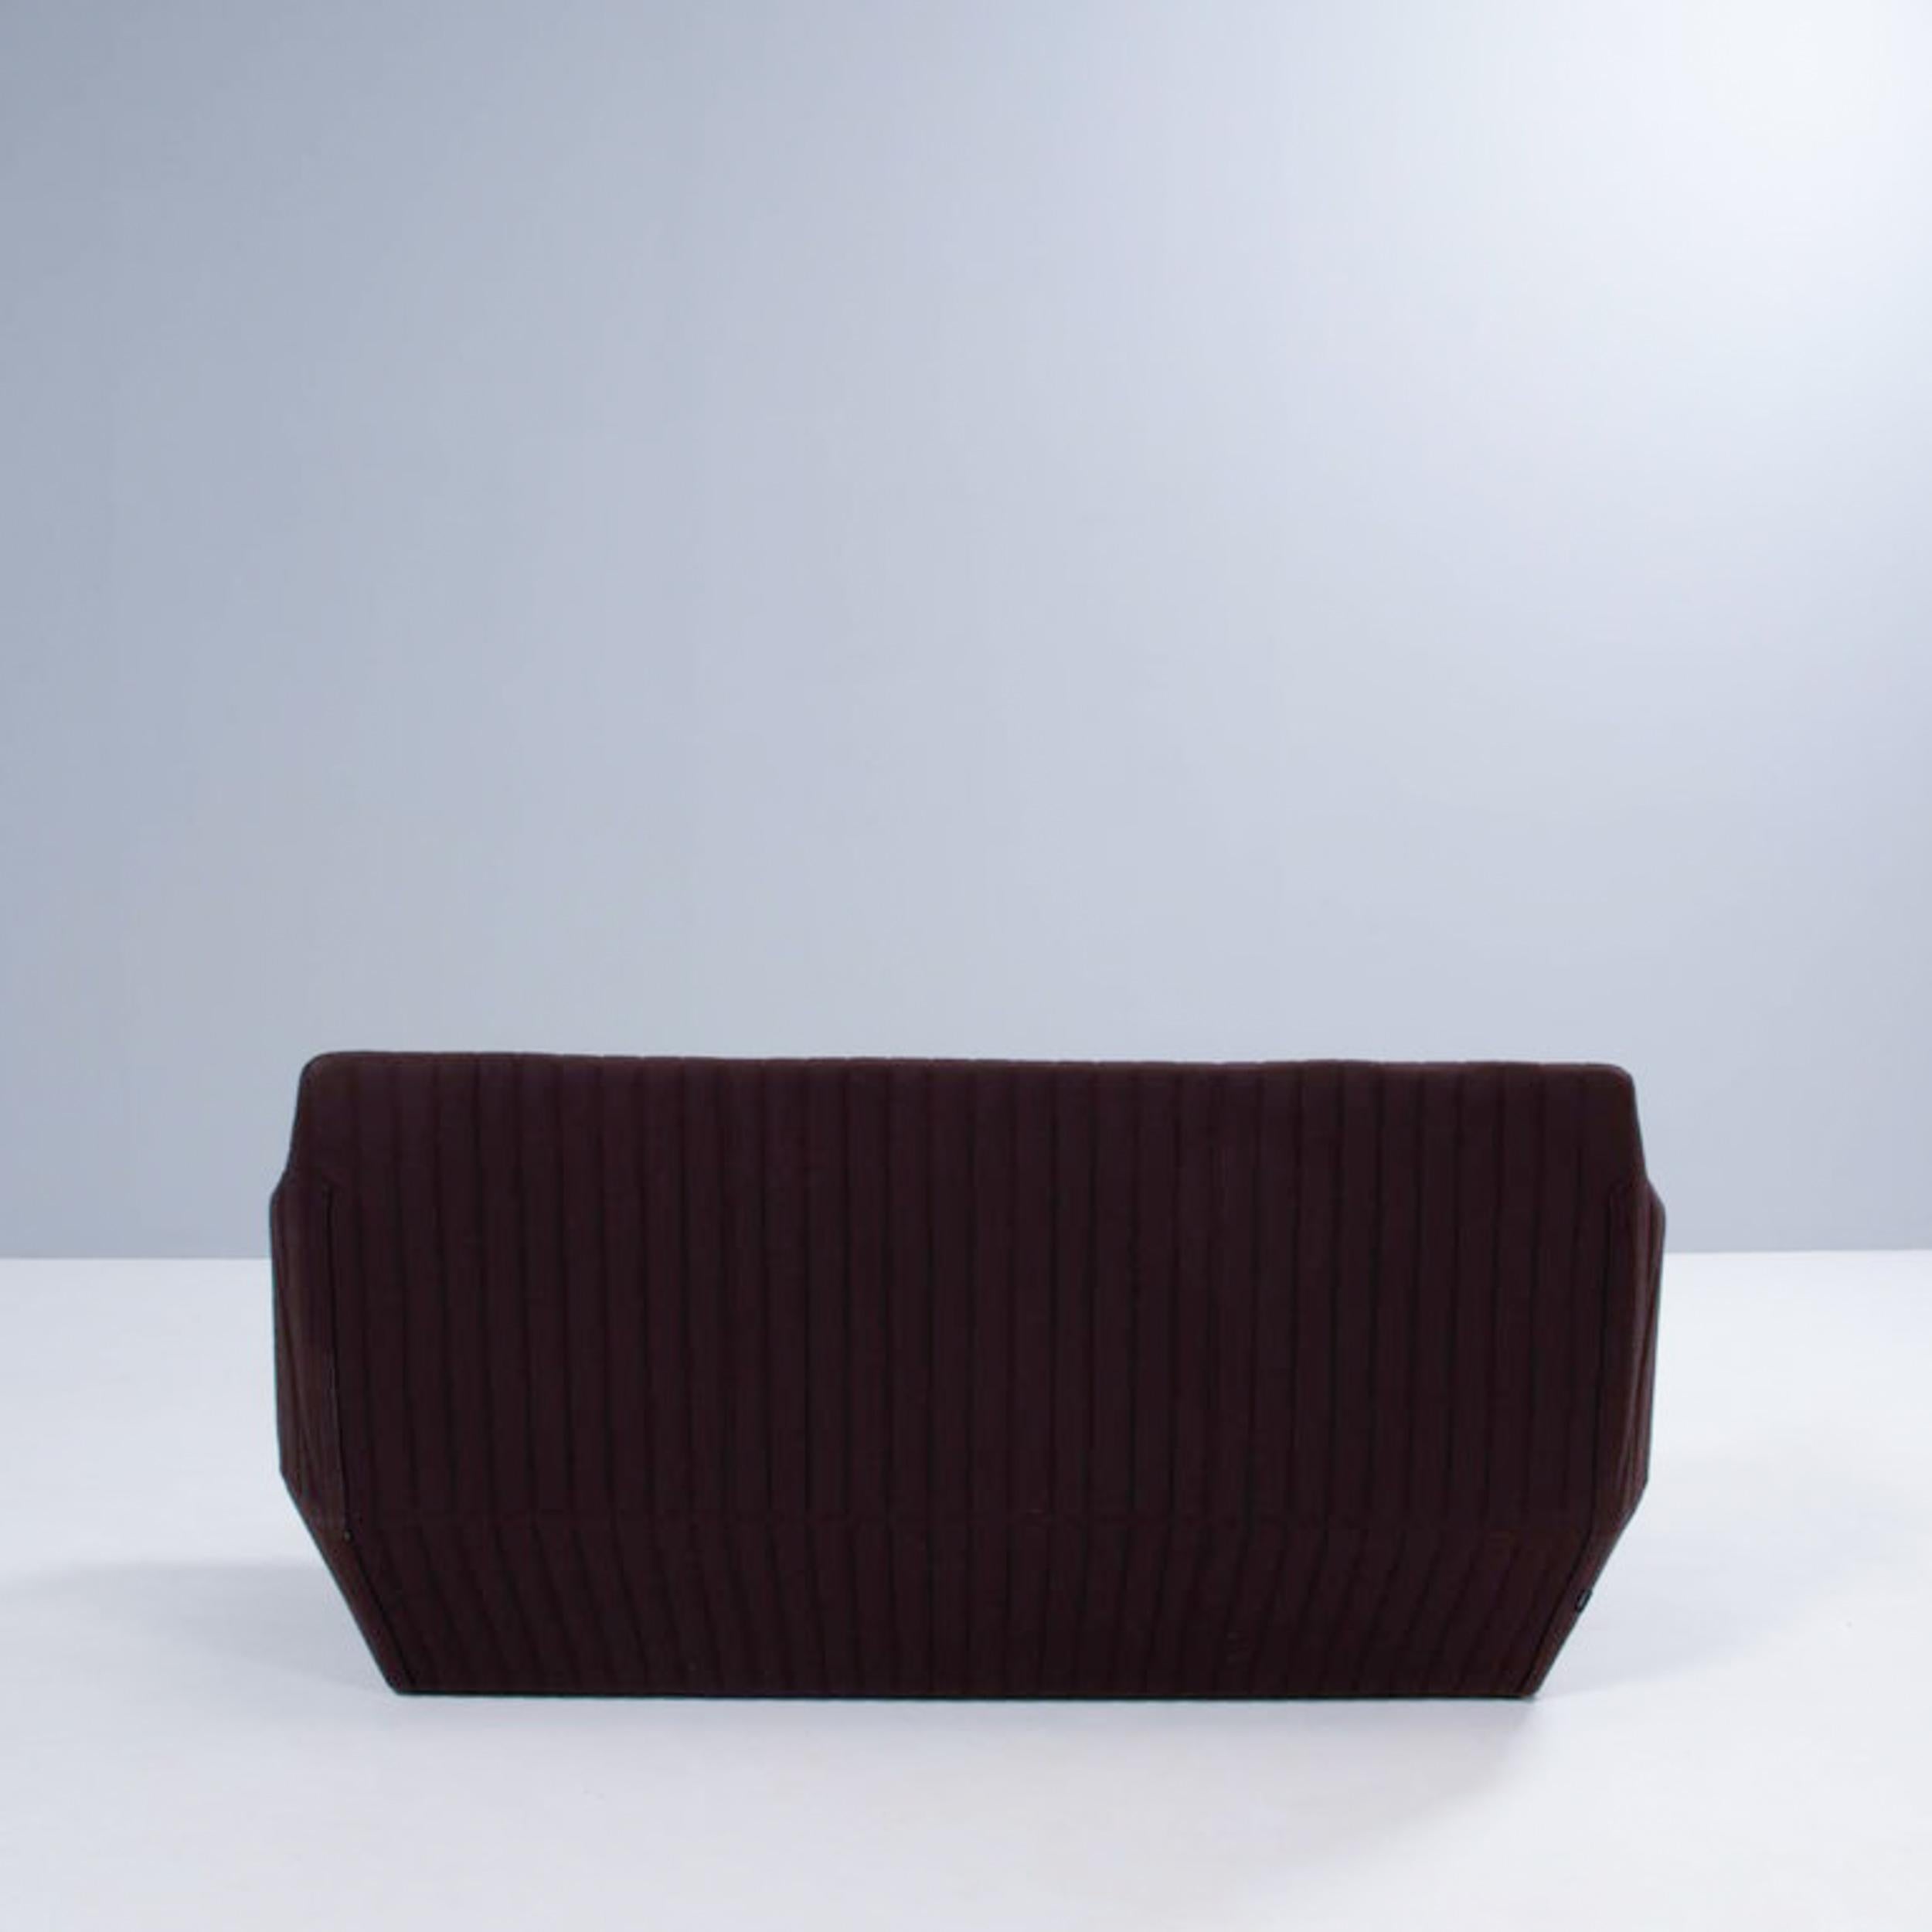 French Ligne Roset by Ronan & Bouroullec Facett Brown Wool Sofa